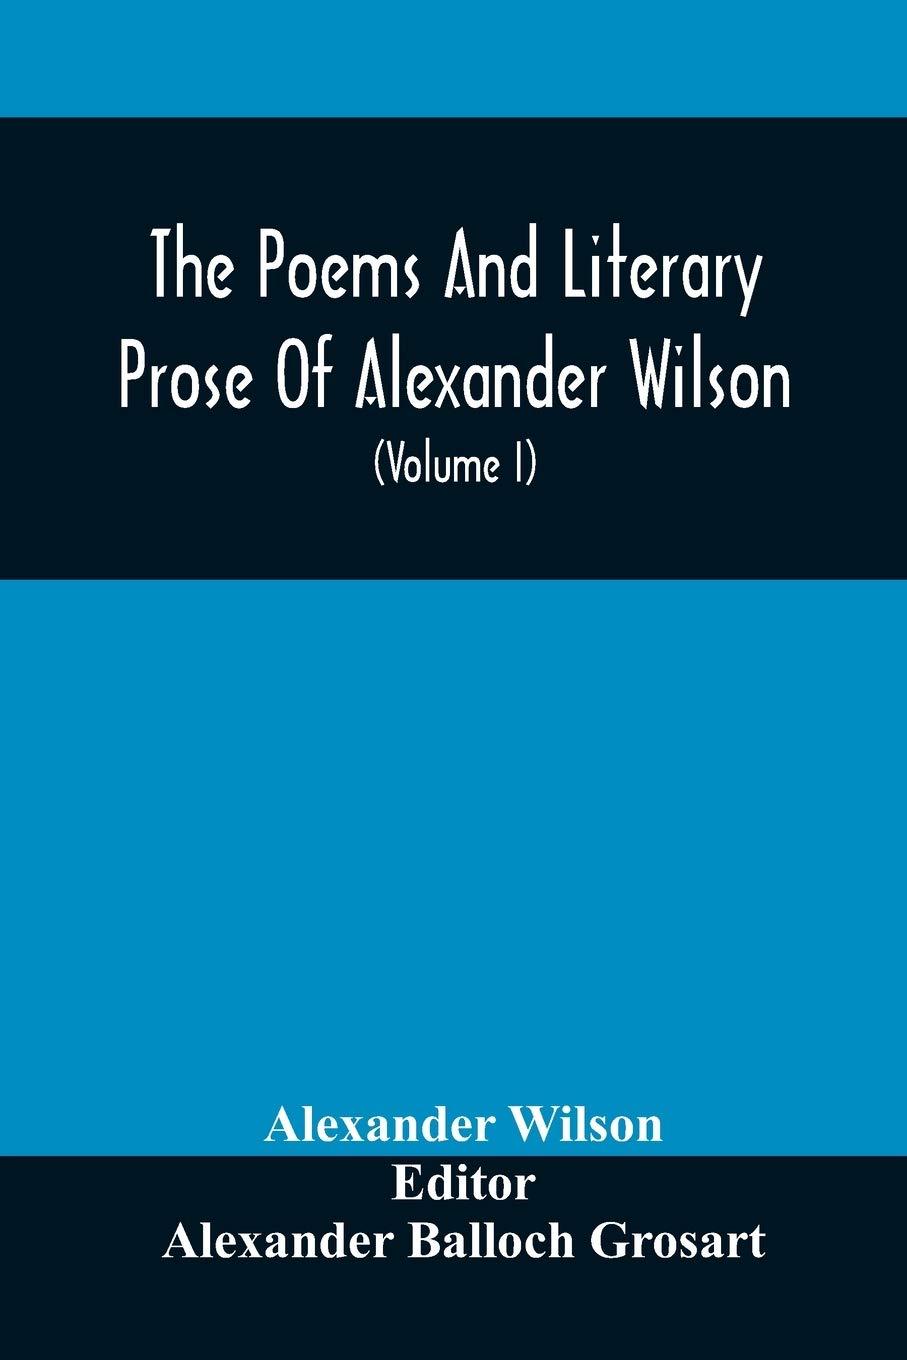 the poems and literary prose of alexander wilson the american ornithologist for the first time fully